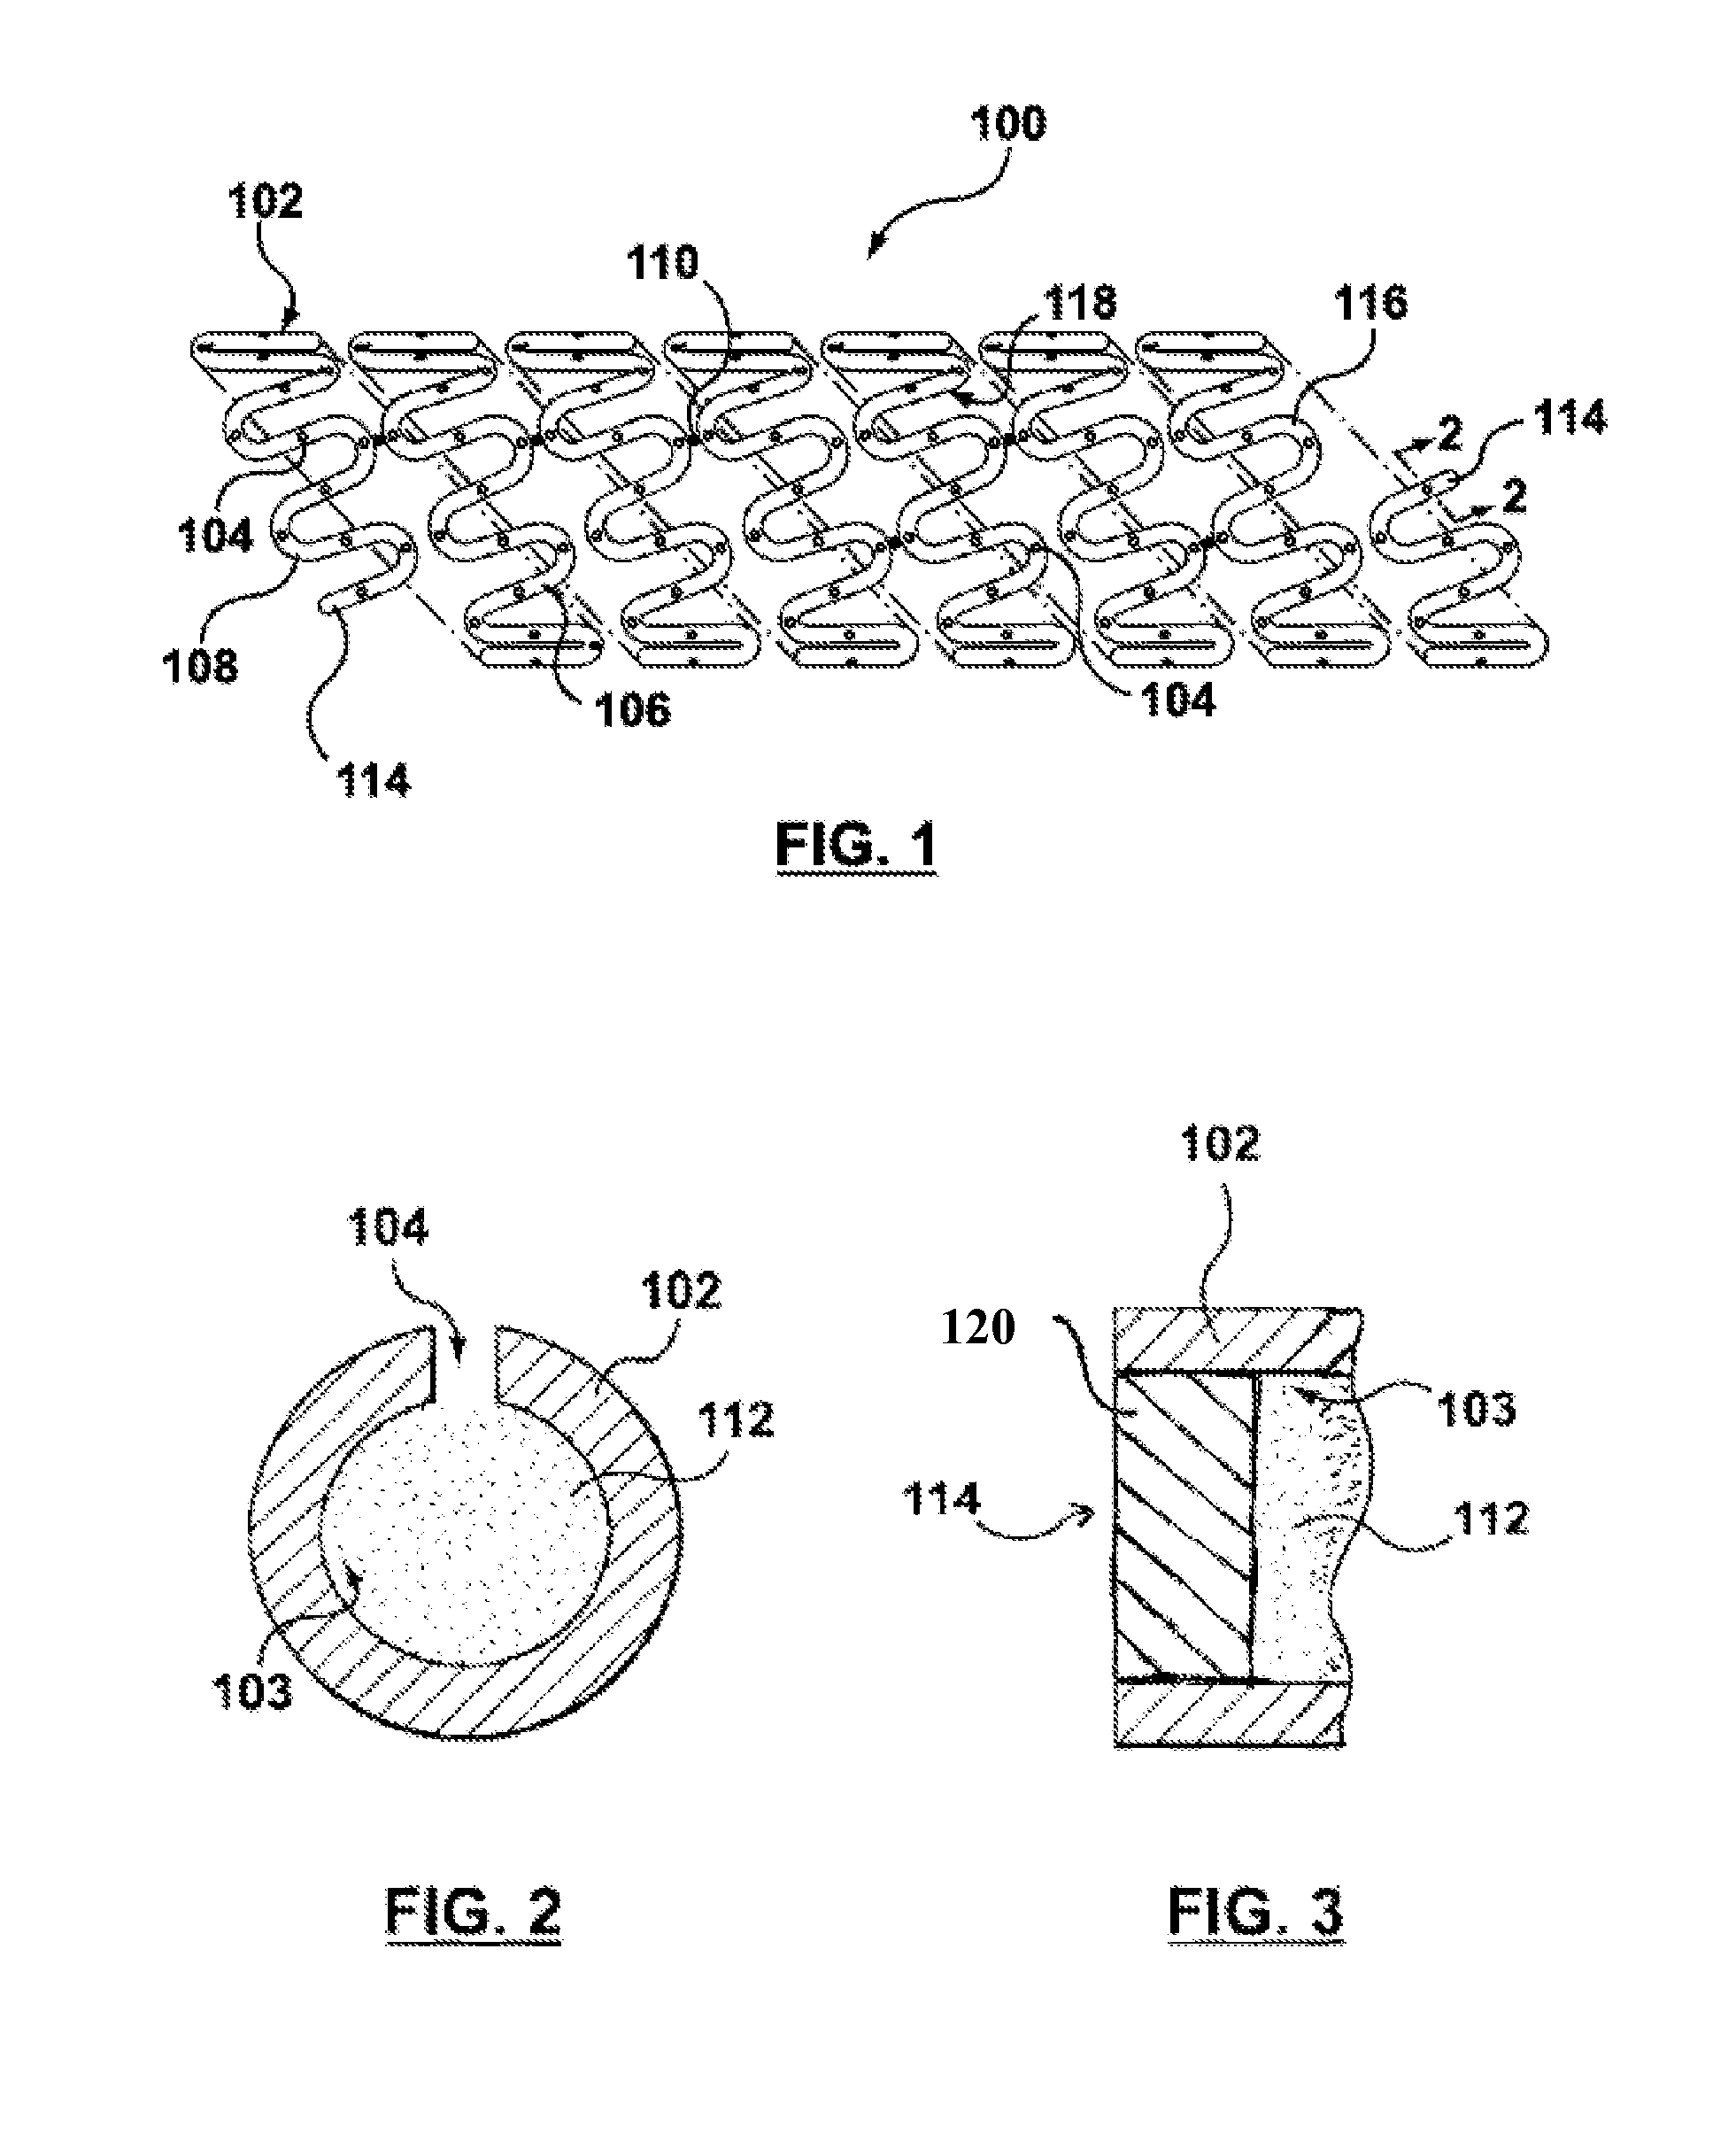 Method of forming a nitinol stent